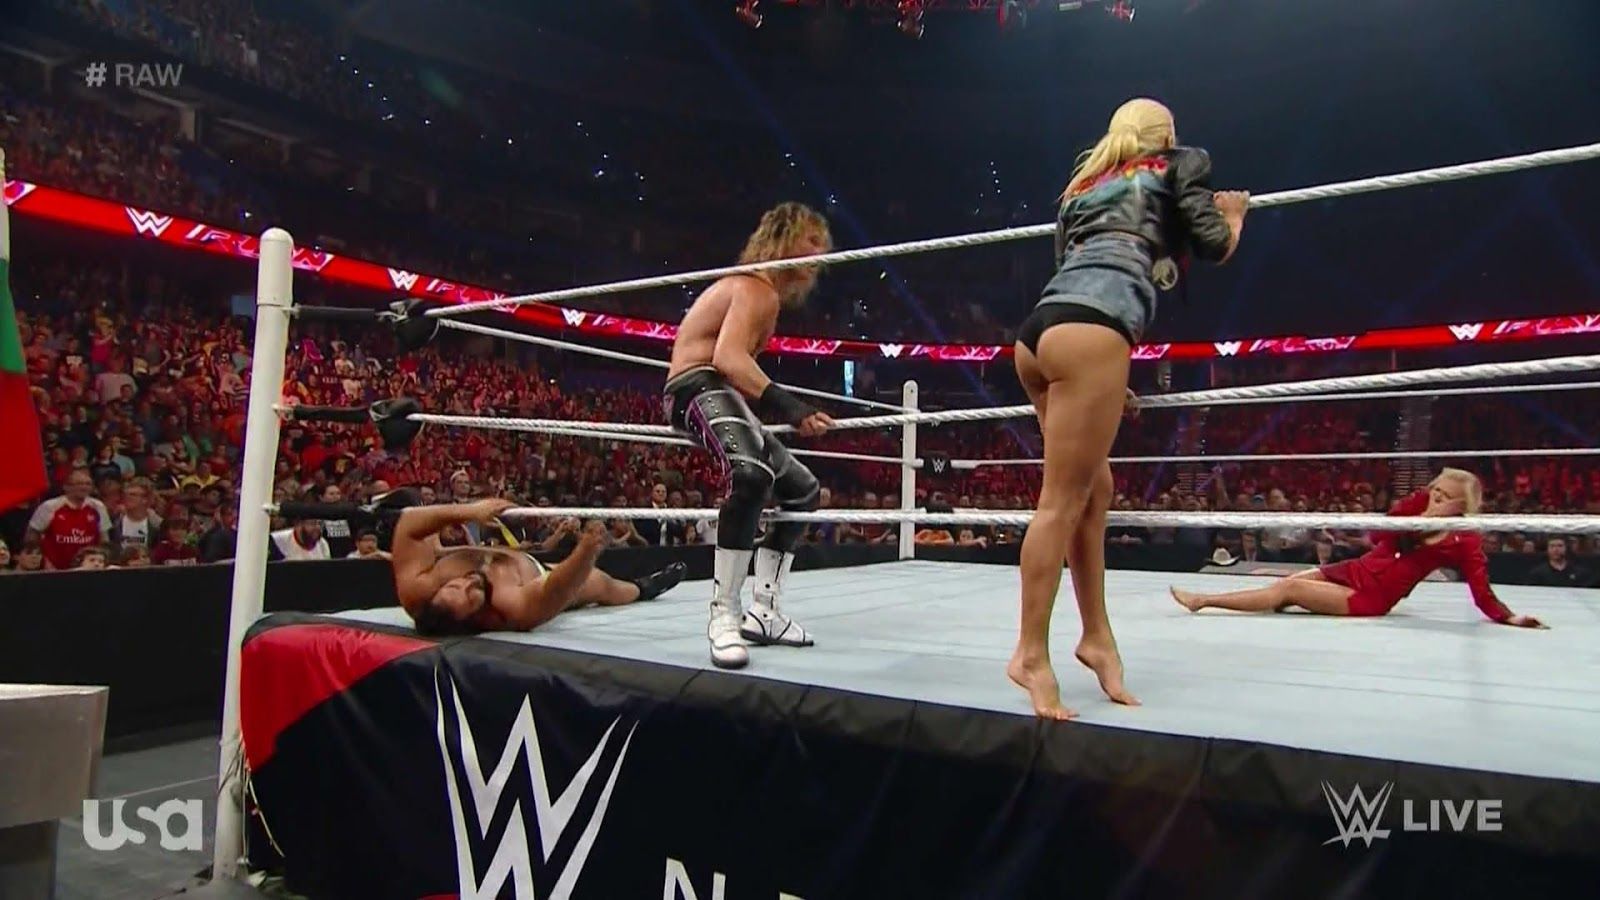 Target reccomend Wwe renee young upskirt pic